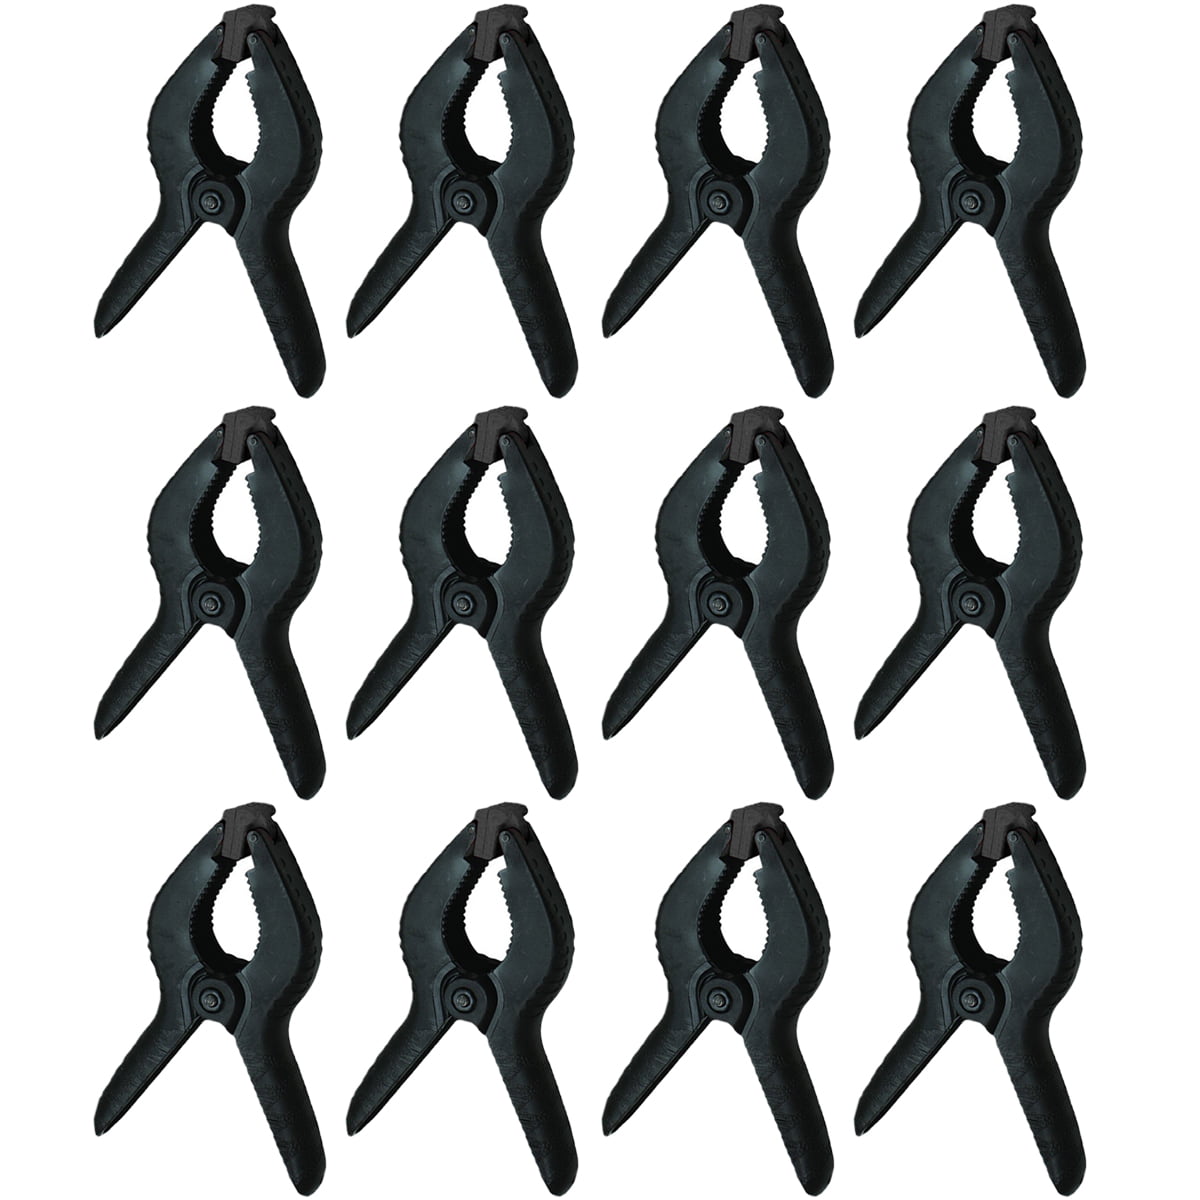 Neewer® 6-Pack Set Heavy Duty Muslin Spring Clamps Clips for Photo Studio Backdrops Backgrounds Woodworking 4.5 inch